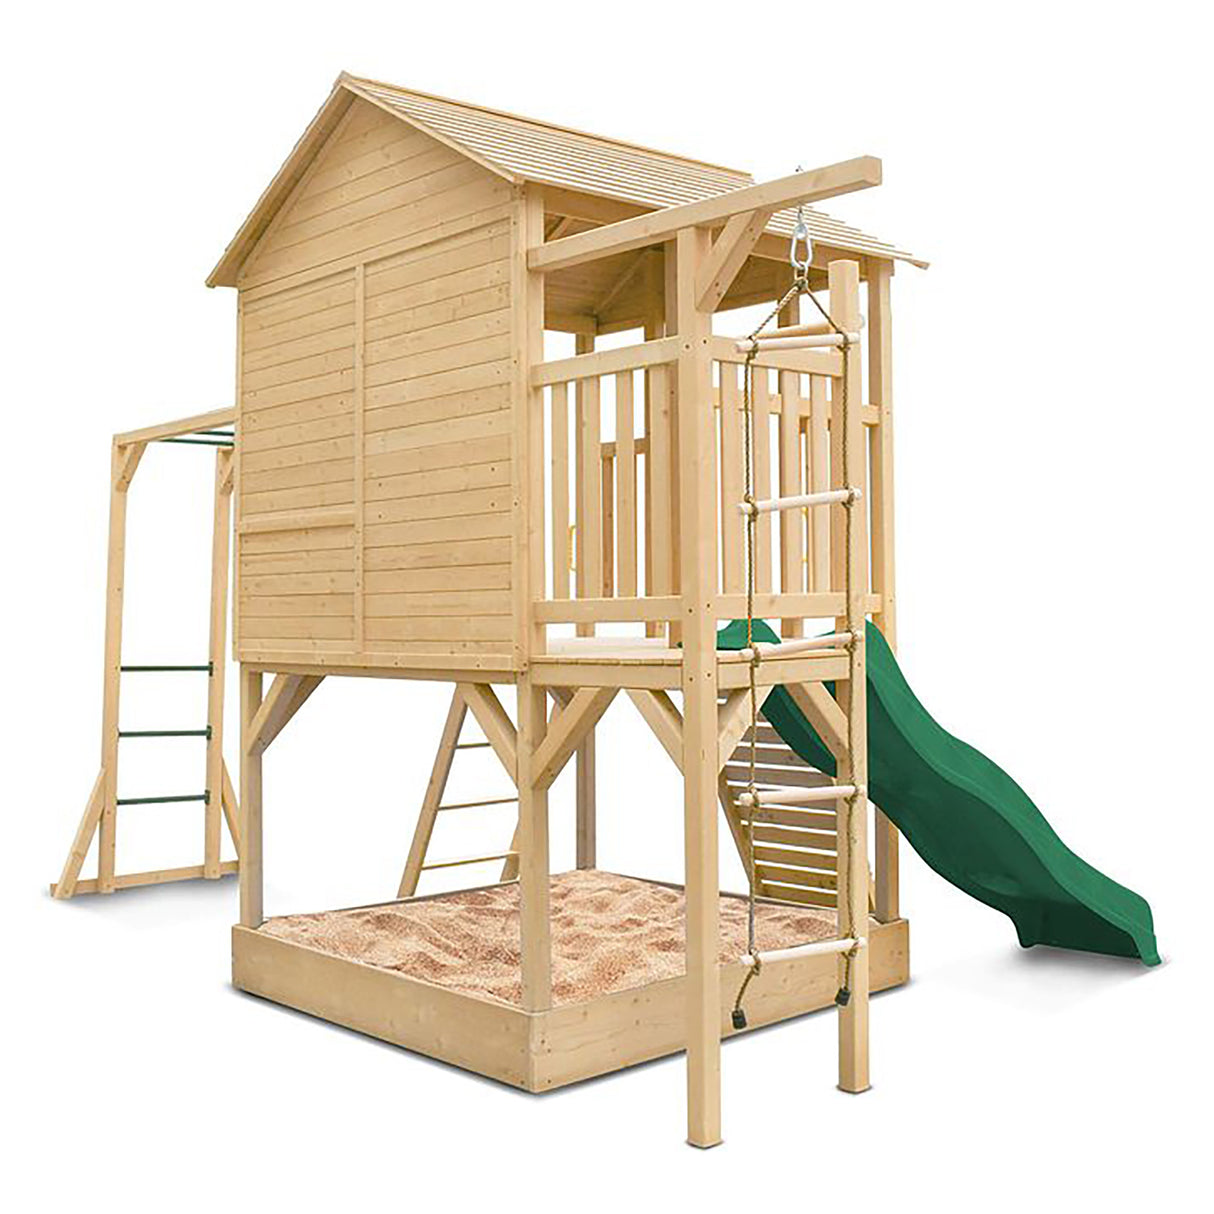 Lifespan Kids Kingston Cubby House with Slide, Green